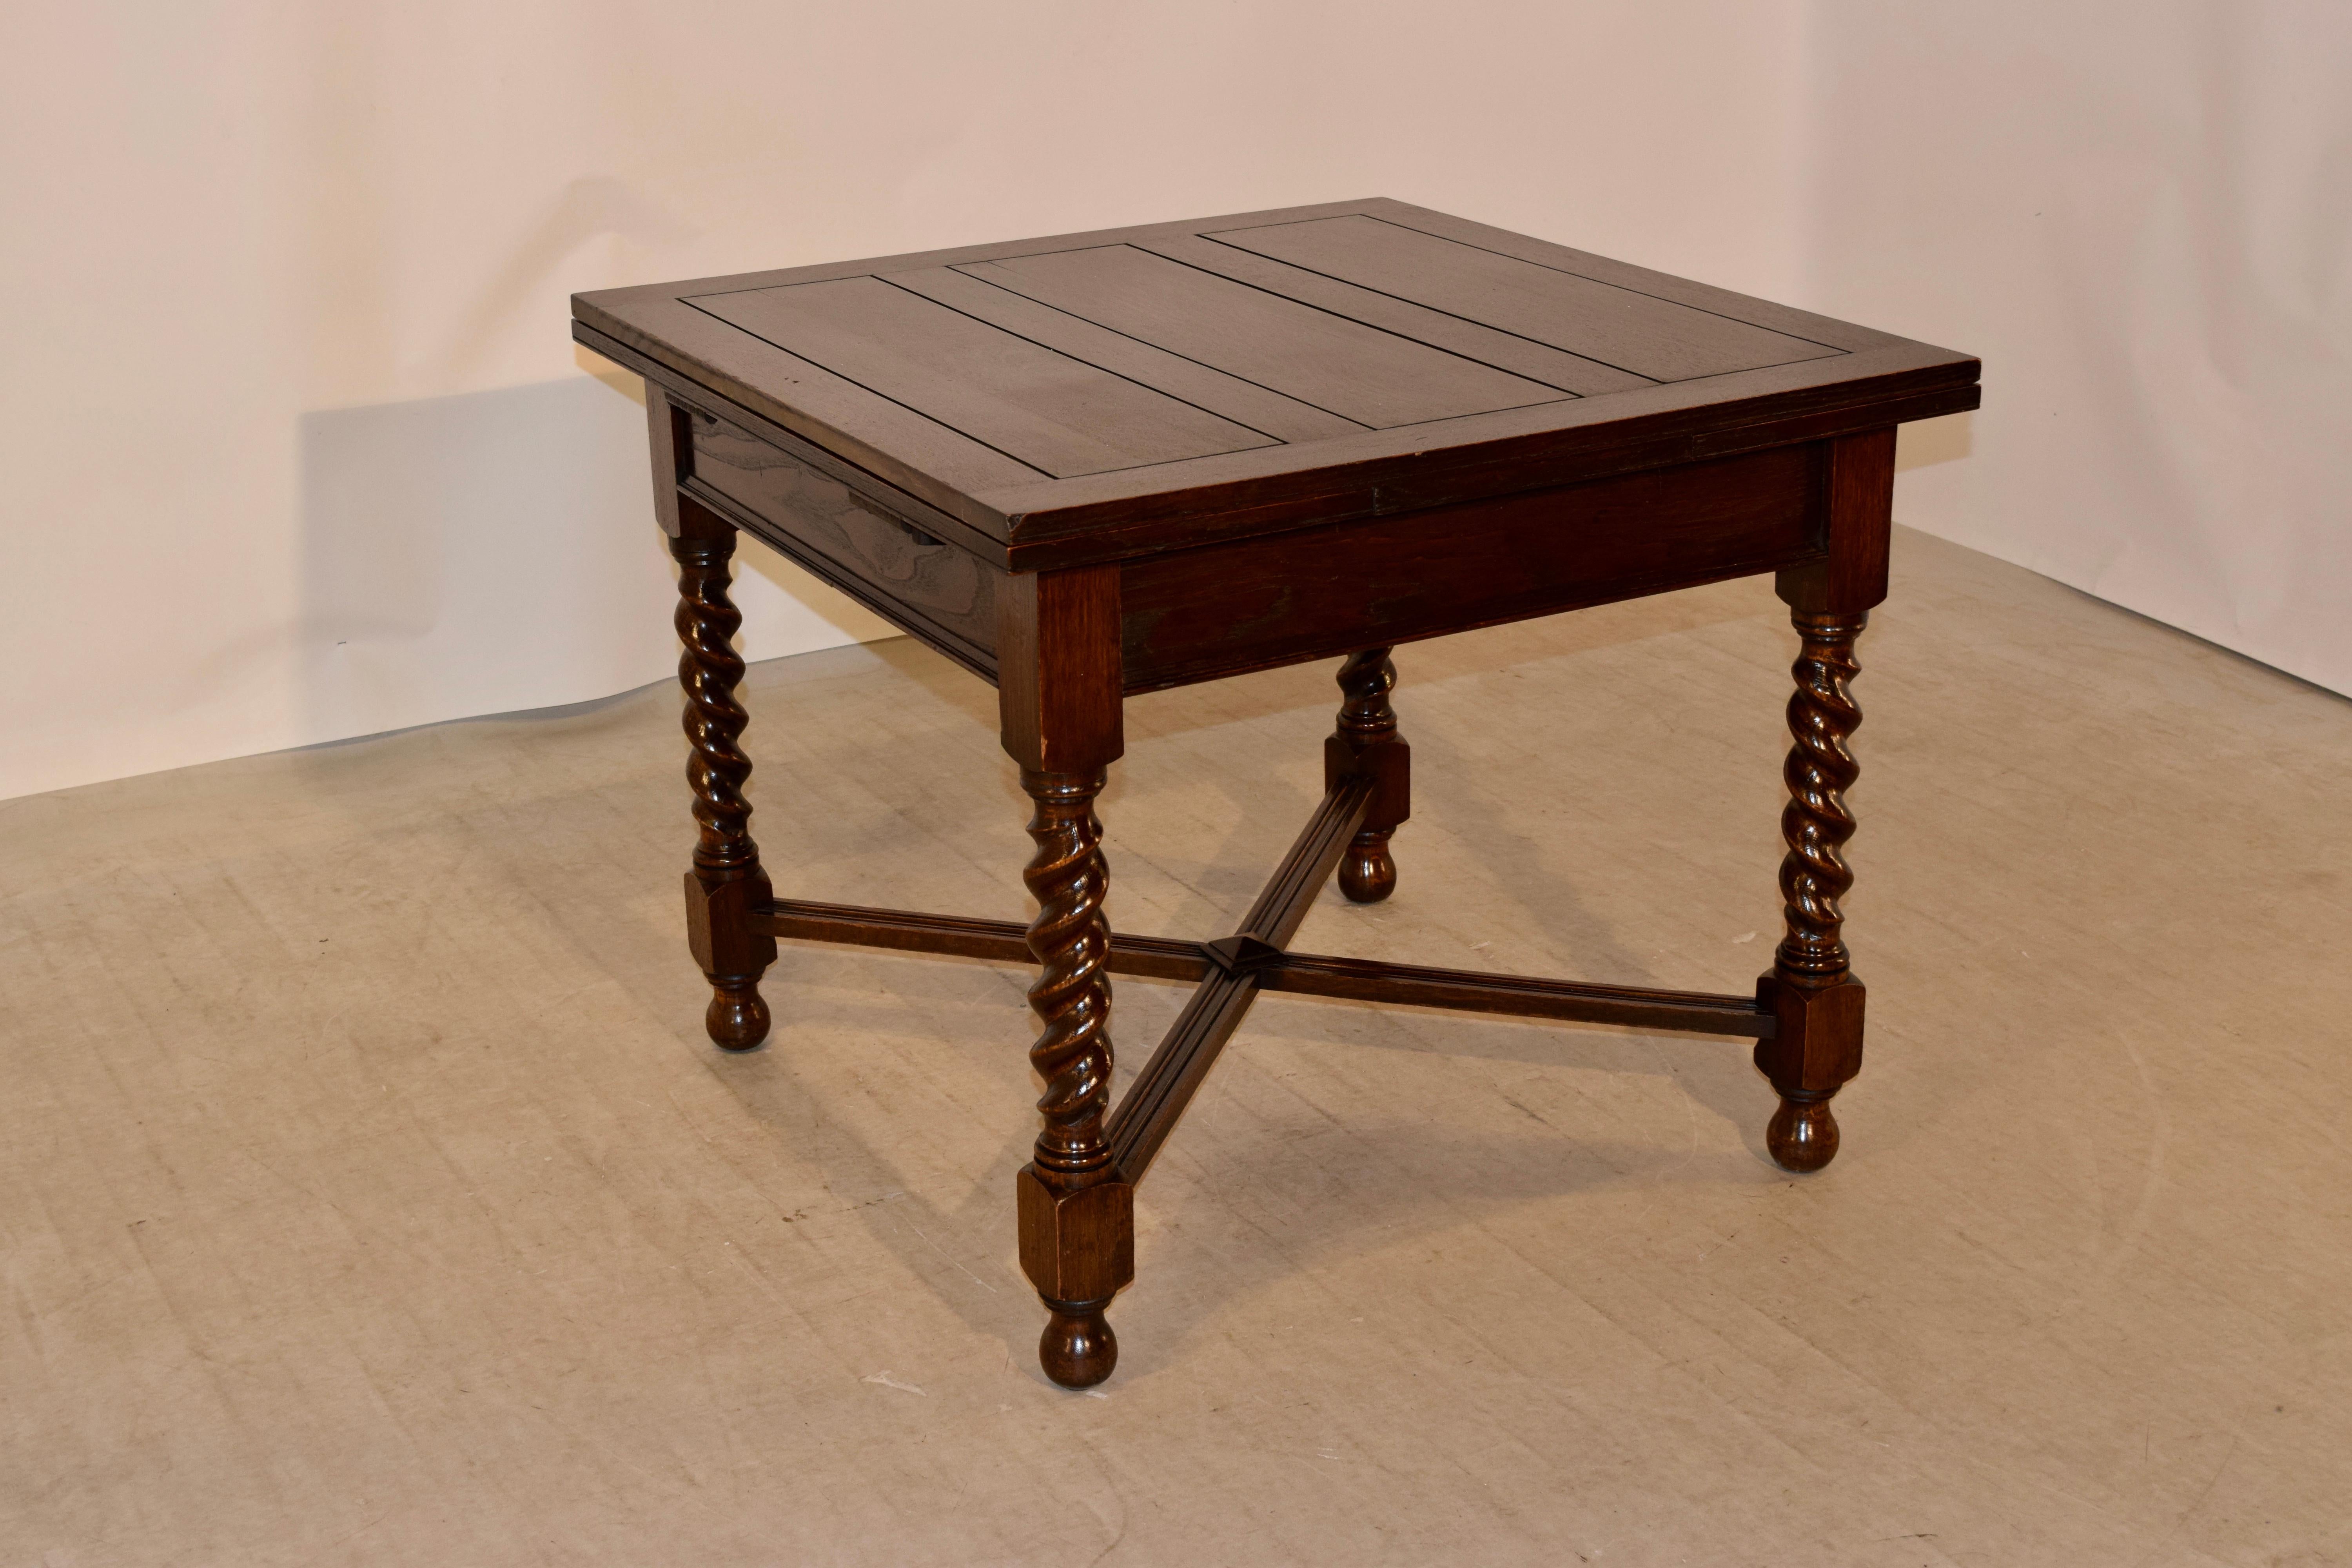 English oak table with draw-leaves made from oak. The top is paneled as well as the pull out / pull-out leaves, following down to a simpler apron with a molded edge and supported on thickly hand-turned barley twist legs, joined by cross stretchers,